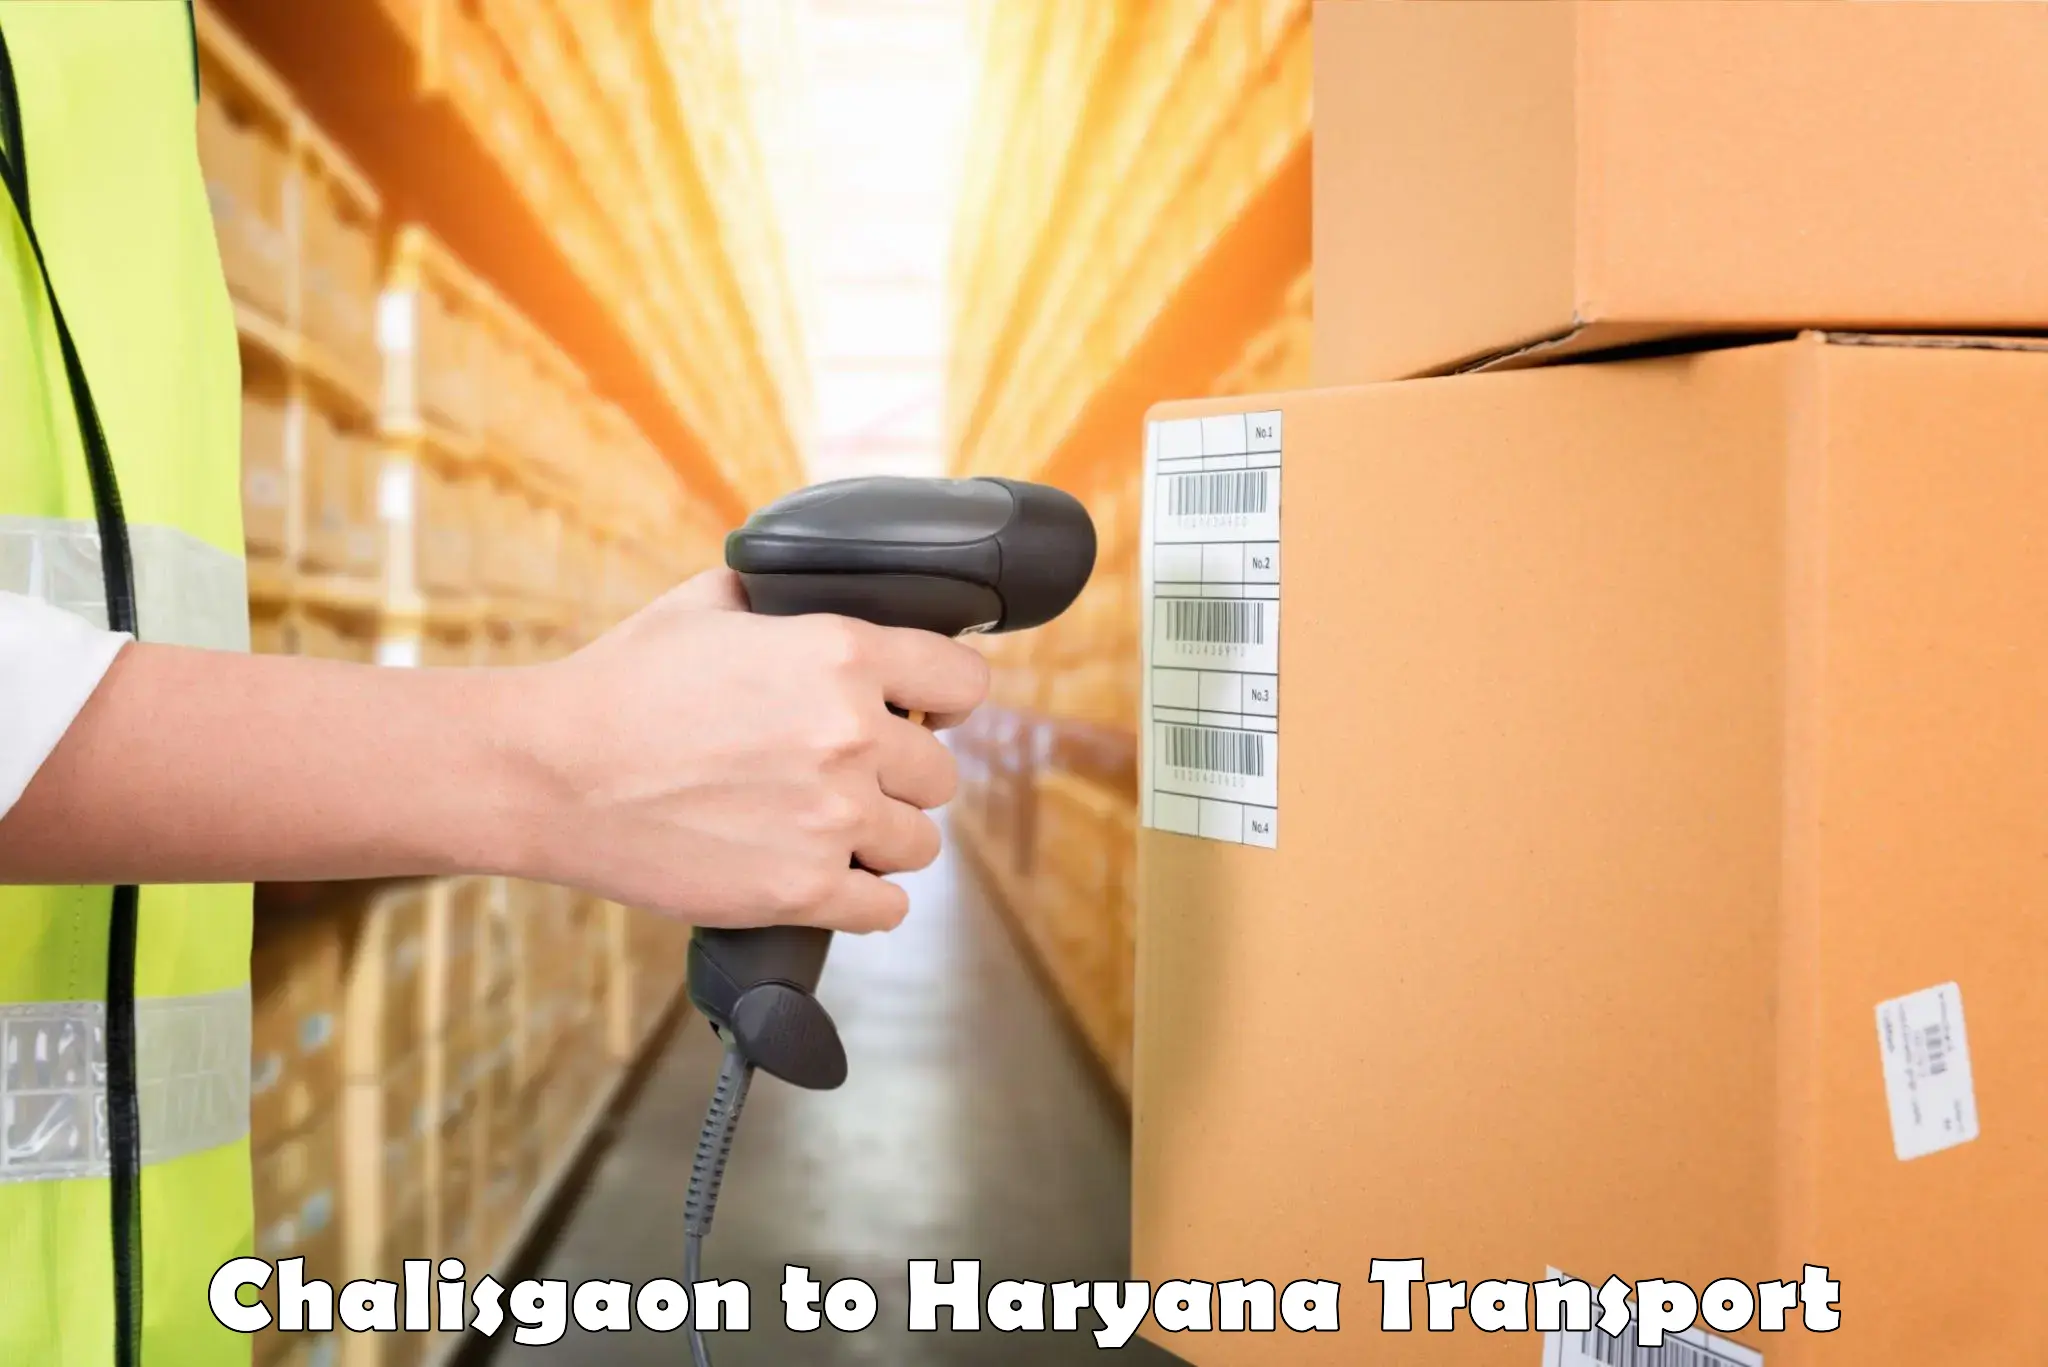 Truck transport companies in India Chalisgaon to Jind